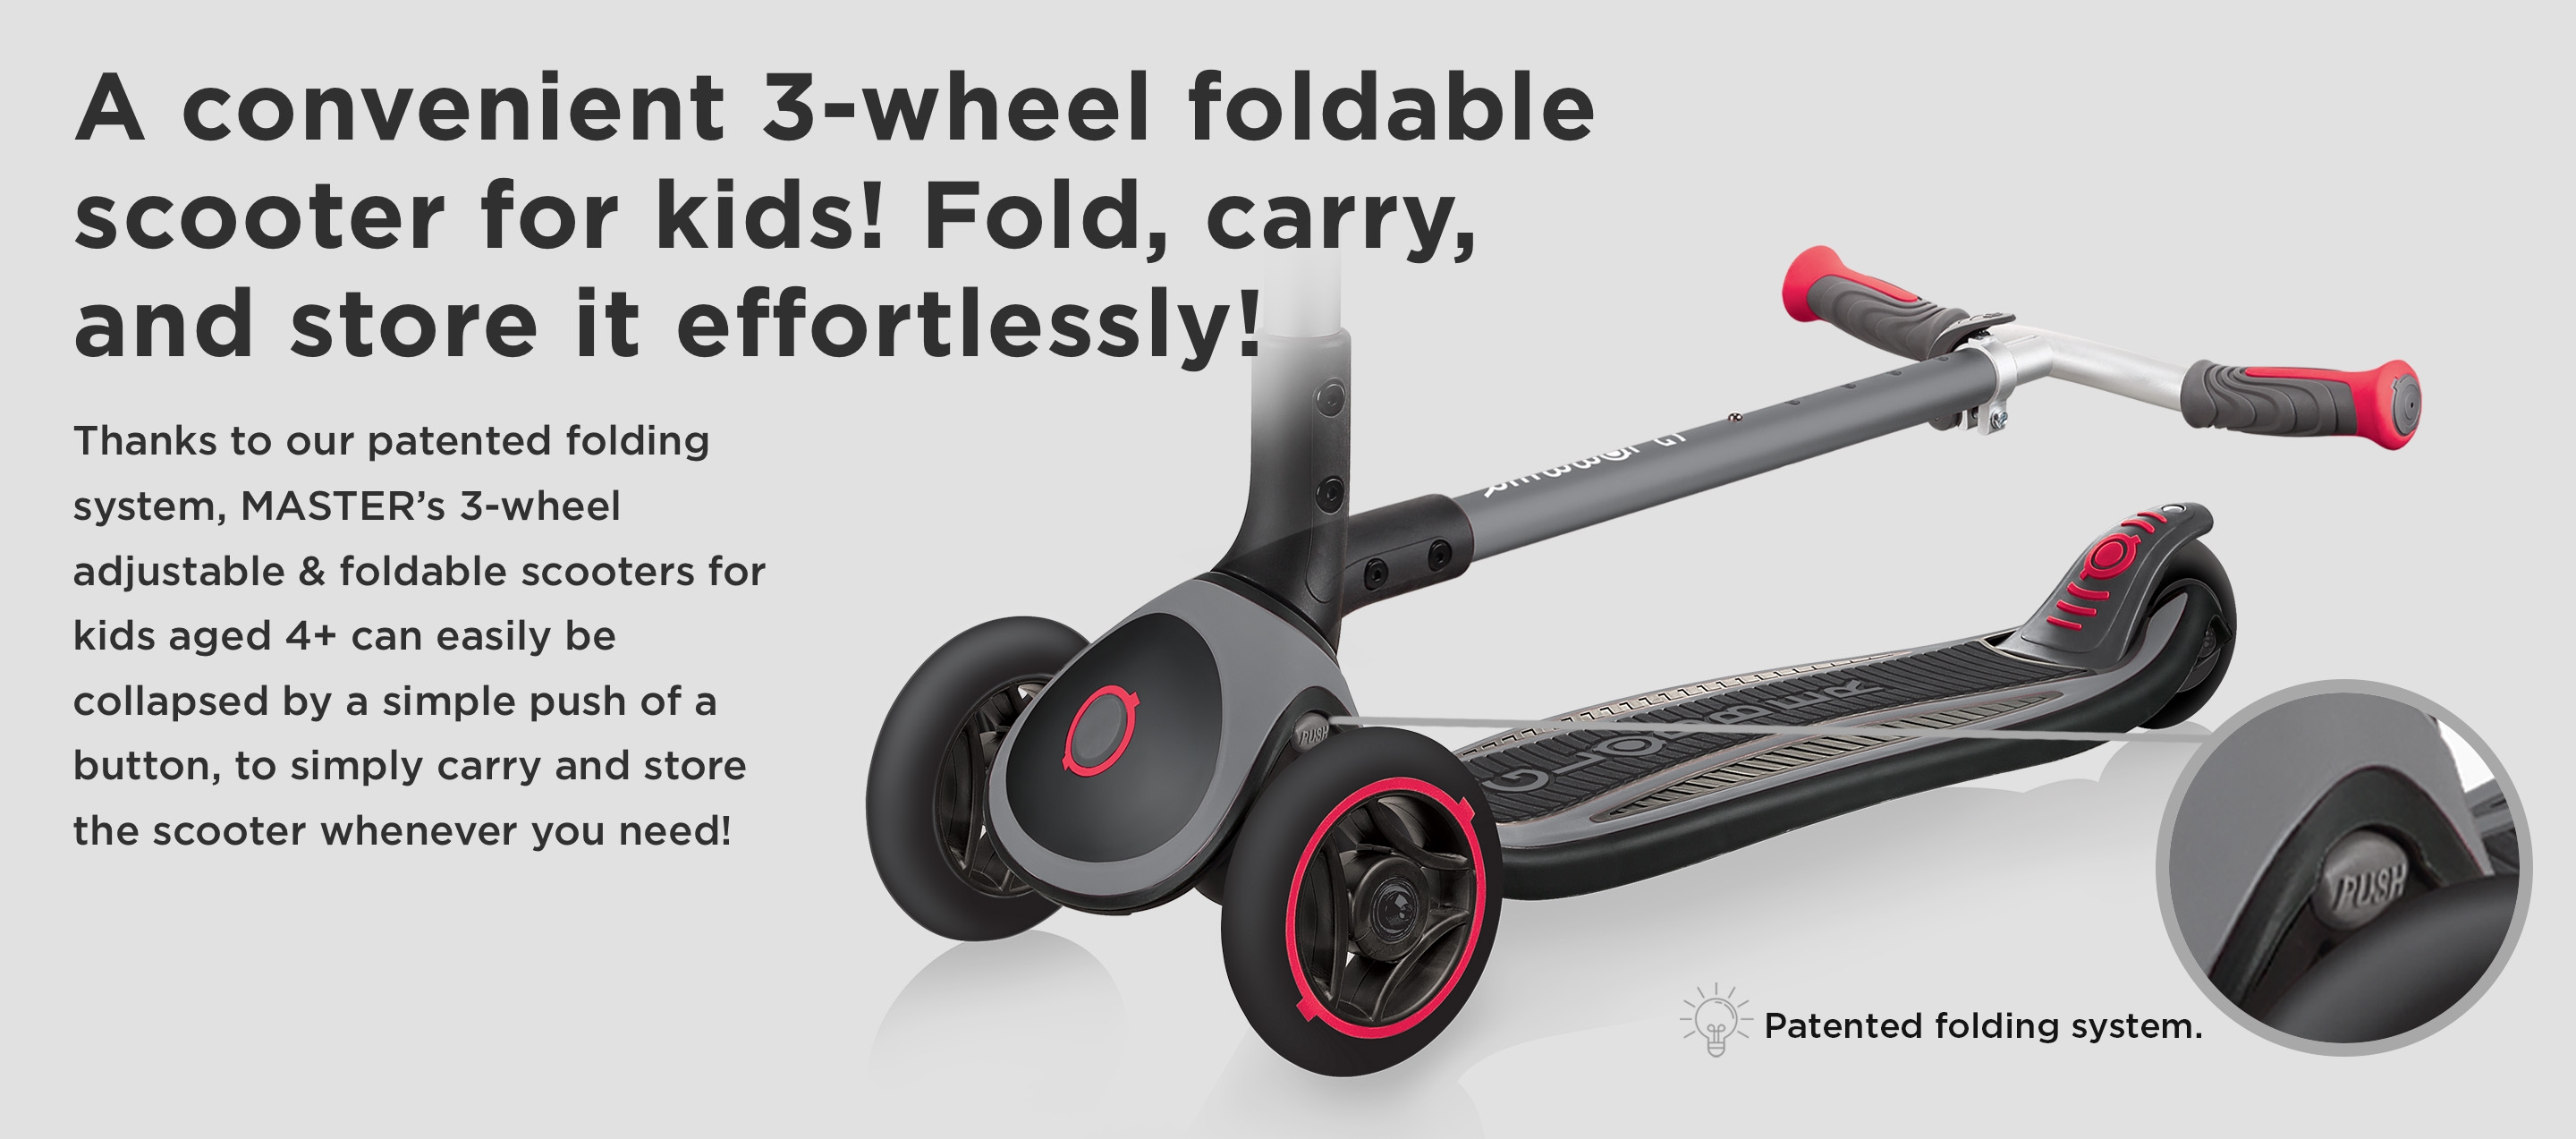 A convenient 3-wheel foldable scooter for kids! Fold, carry, and store it effortlessly! Thanks to our patented folding system, MASTER’s 3-wheel adjustable & foldable scooters for kids aged 4+ can easily be collapsed by a simple push of a button, to simply carry and store the scooter whenever you need! 